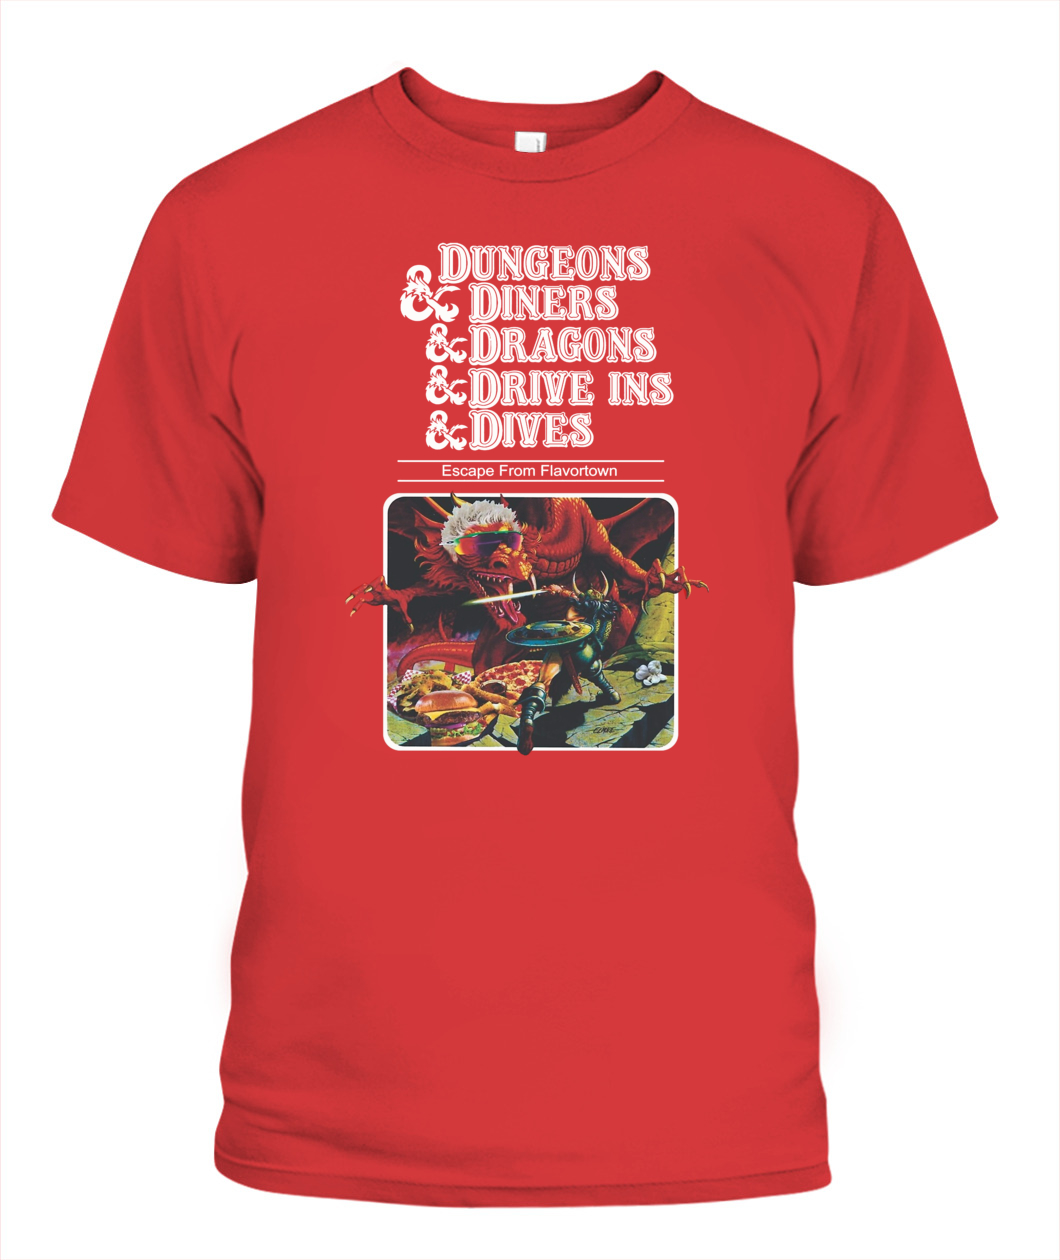 Dungeons & Diners & Dragons & Drive-Ins & Dives T-Shirt - Ellie Shirt